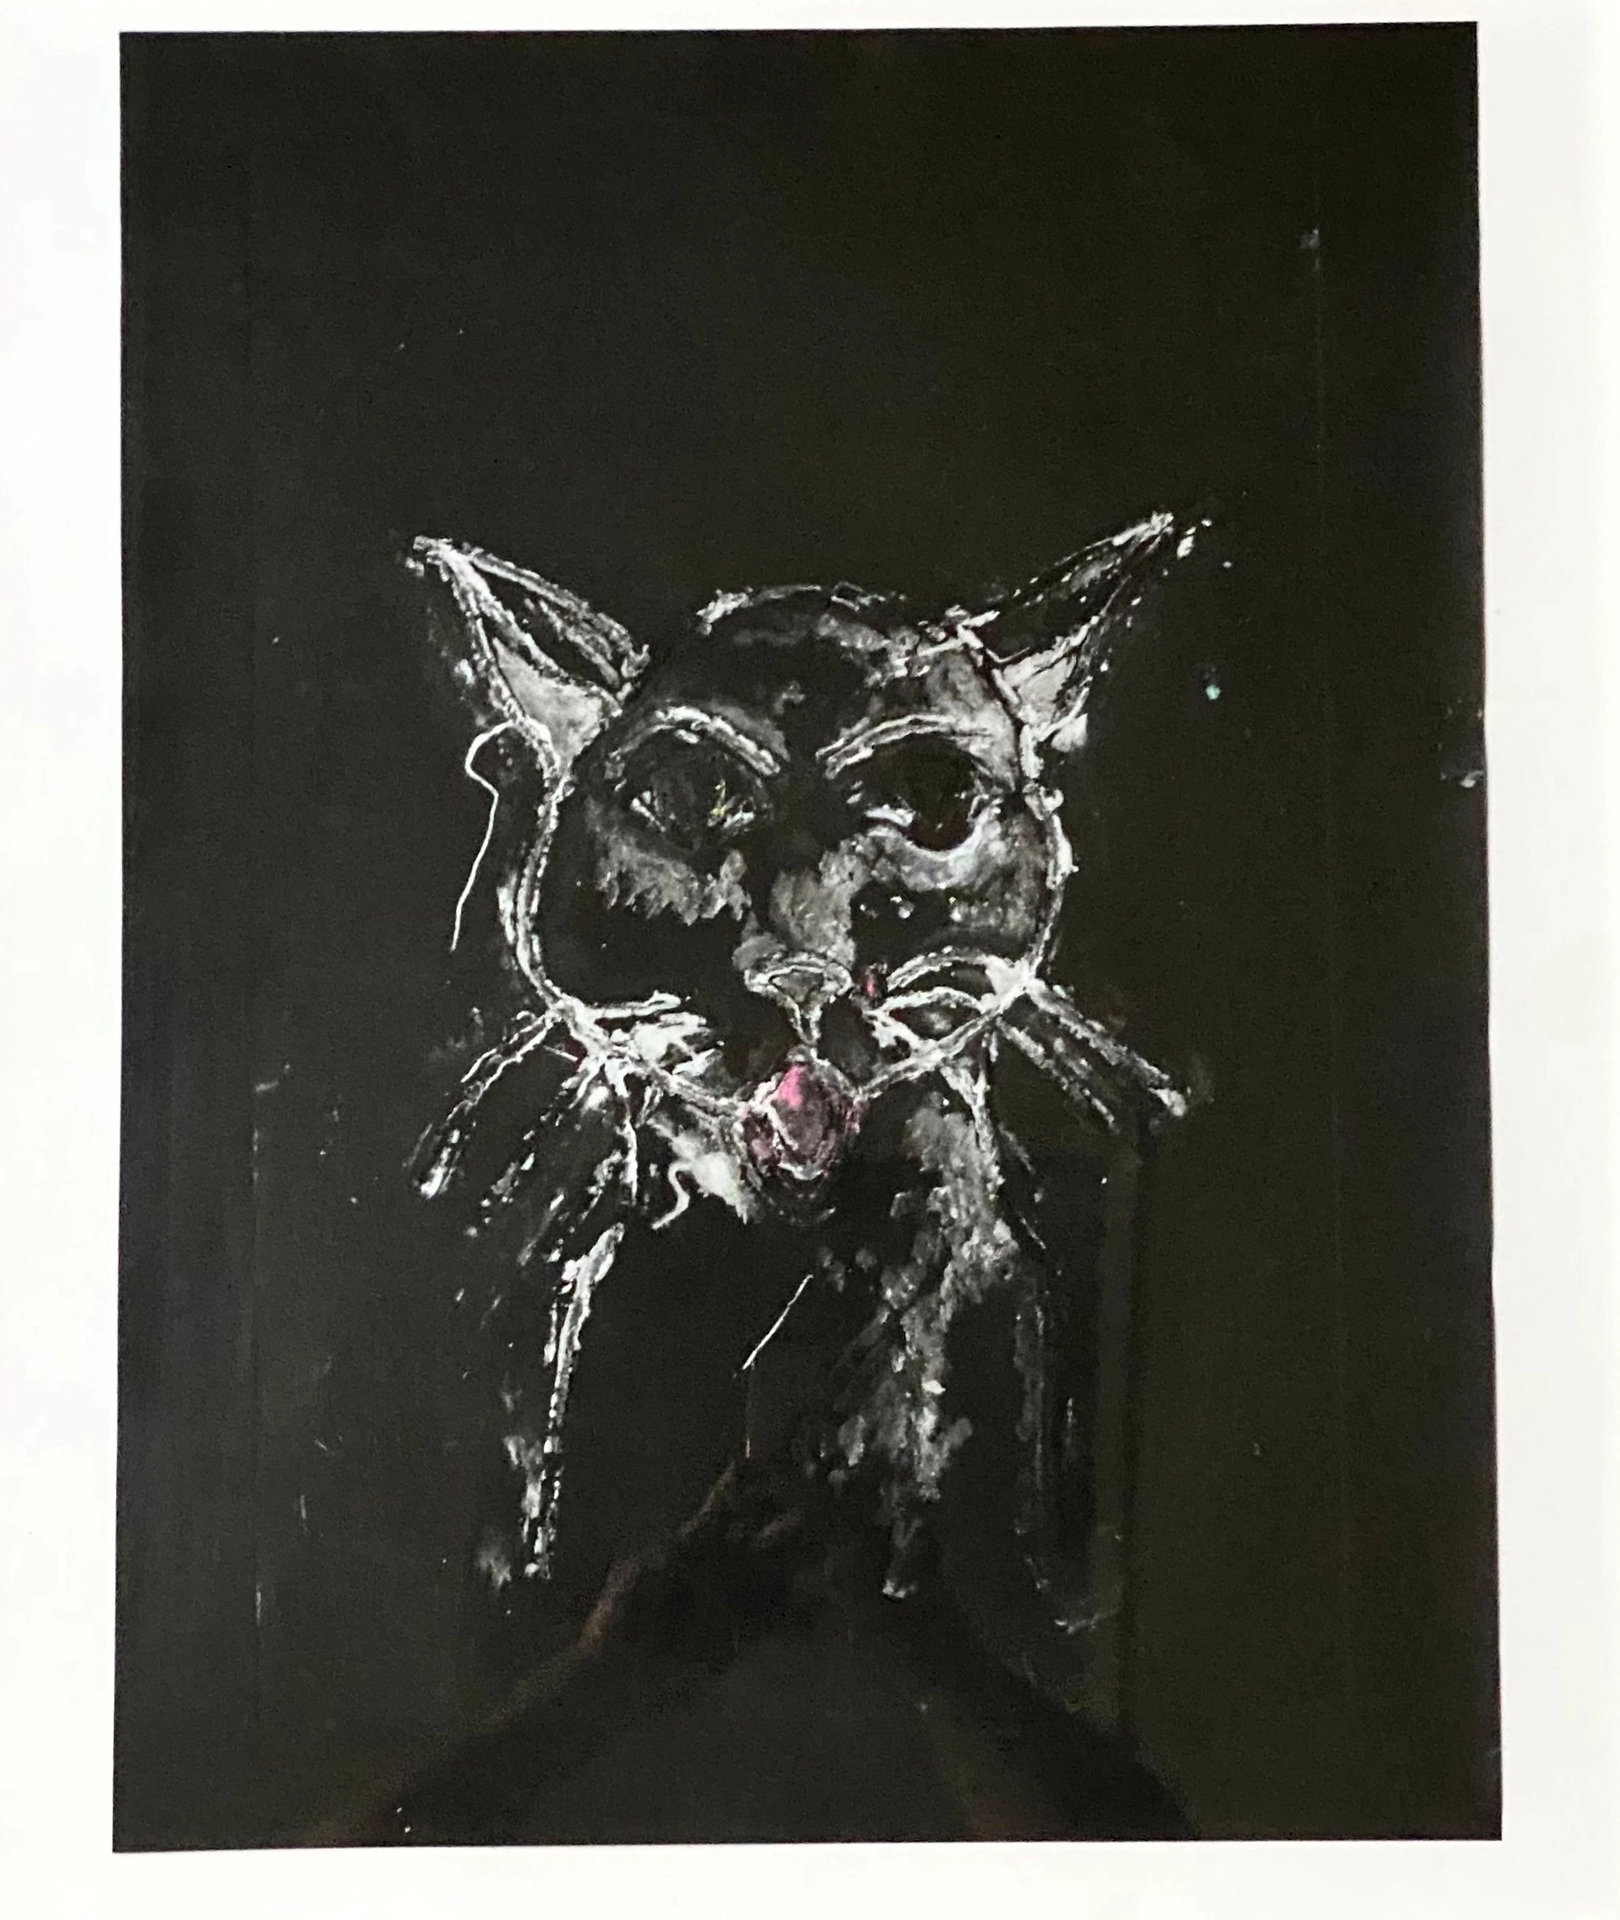 This vertical rectangular print on black paper features the ghostly image of a light gray cat. Its pink tongue sticks out in stark contrast to the monochromatic feel.